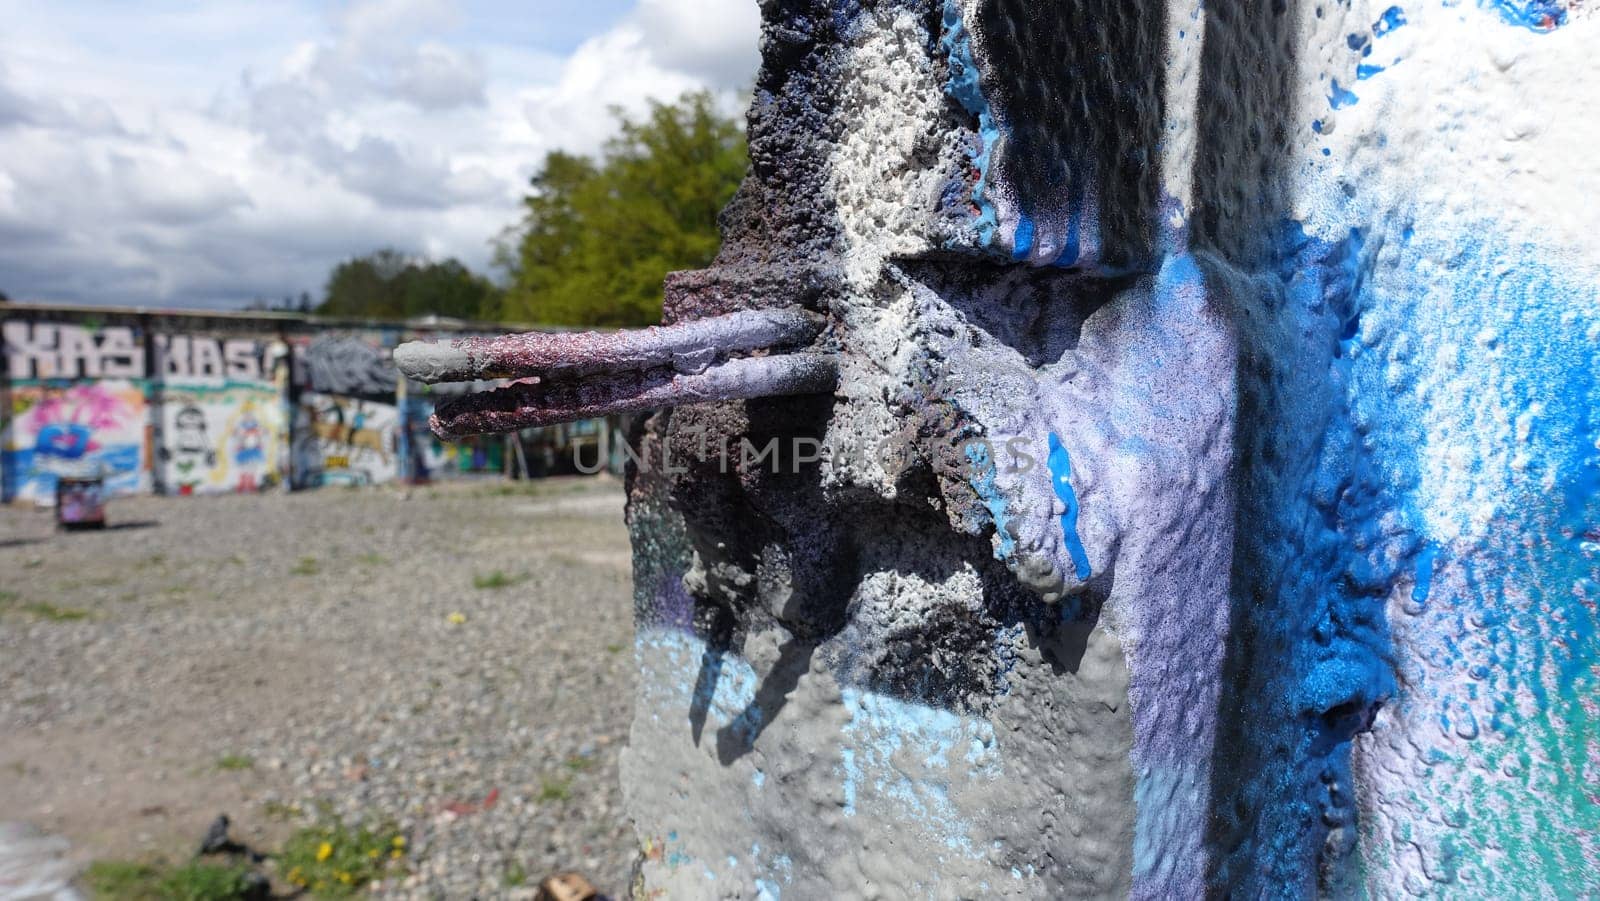 Stockholm, Snosatra, Sweden, May 23 2021. Graffiti exhibition on the outskirts of the city. Reinforcement.